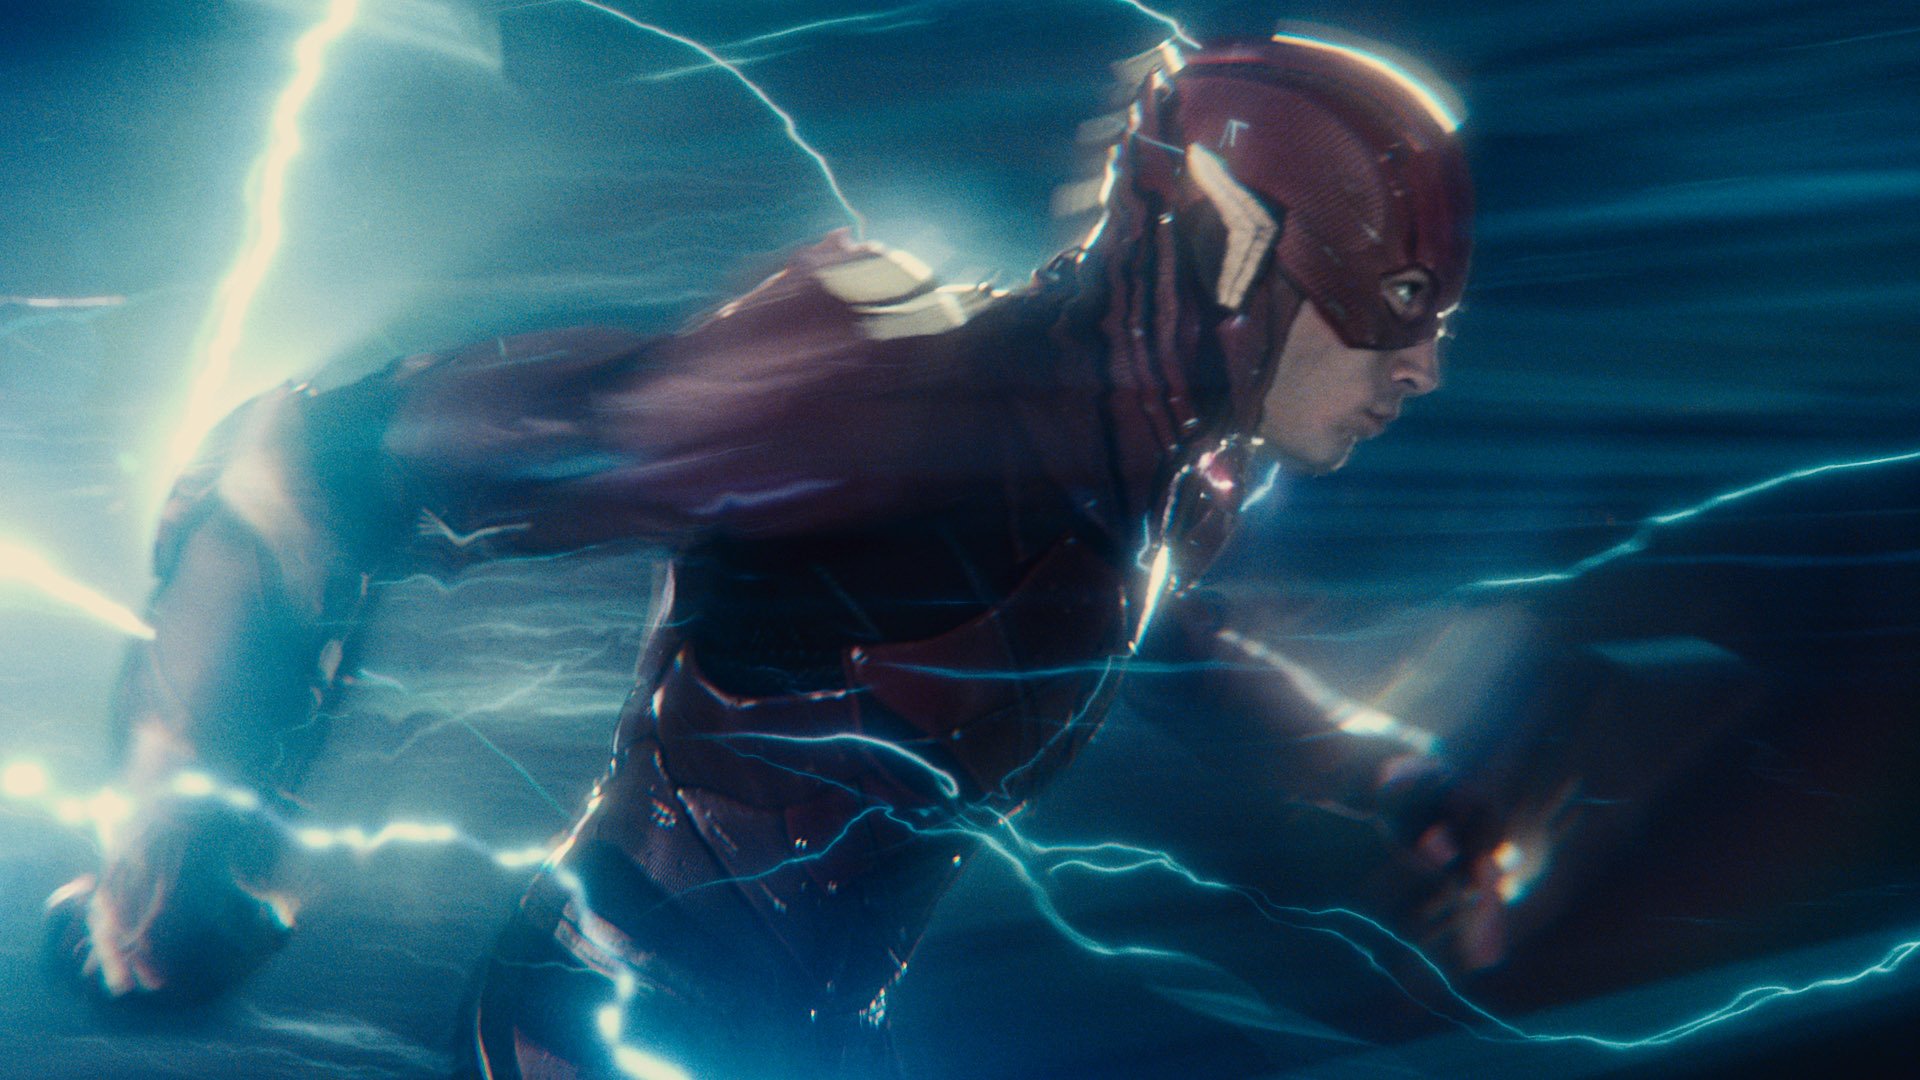 The Flash Movie Is Going To Restart the DC Film Universe